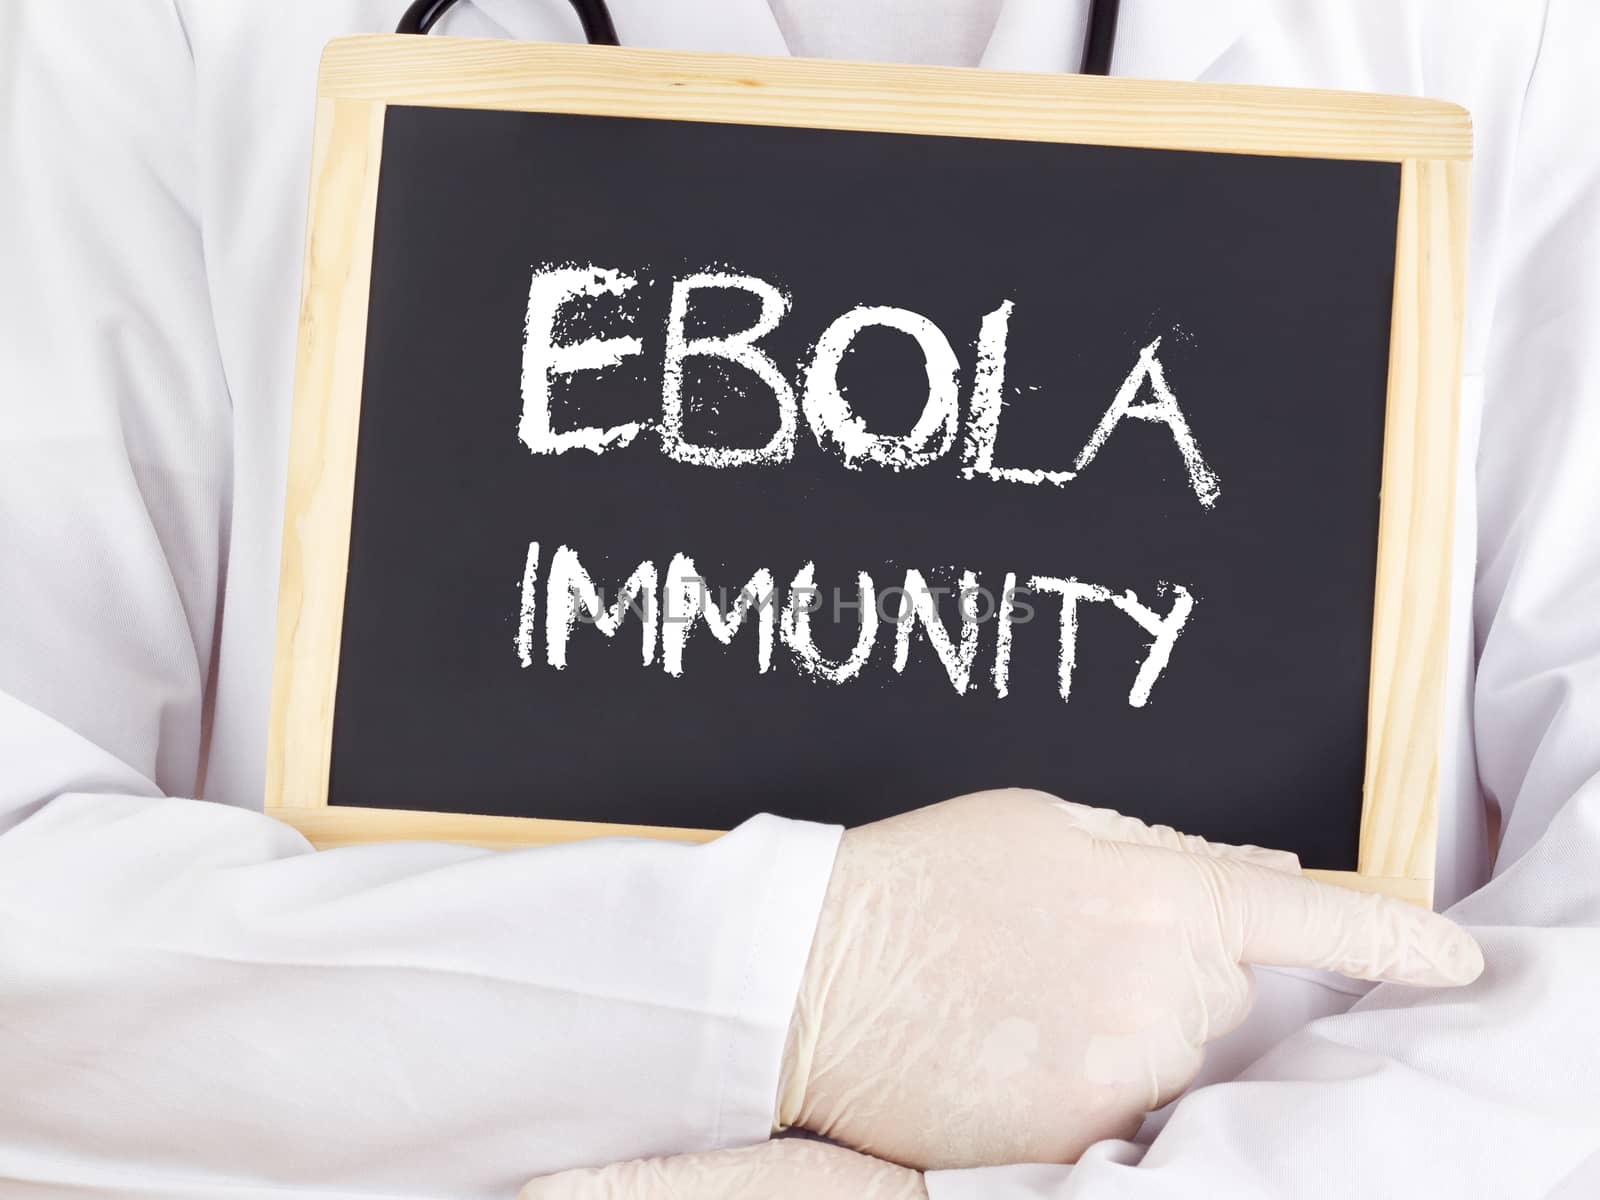 Doctor shows information: Ebola immunity by gwolters